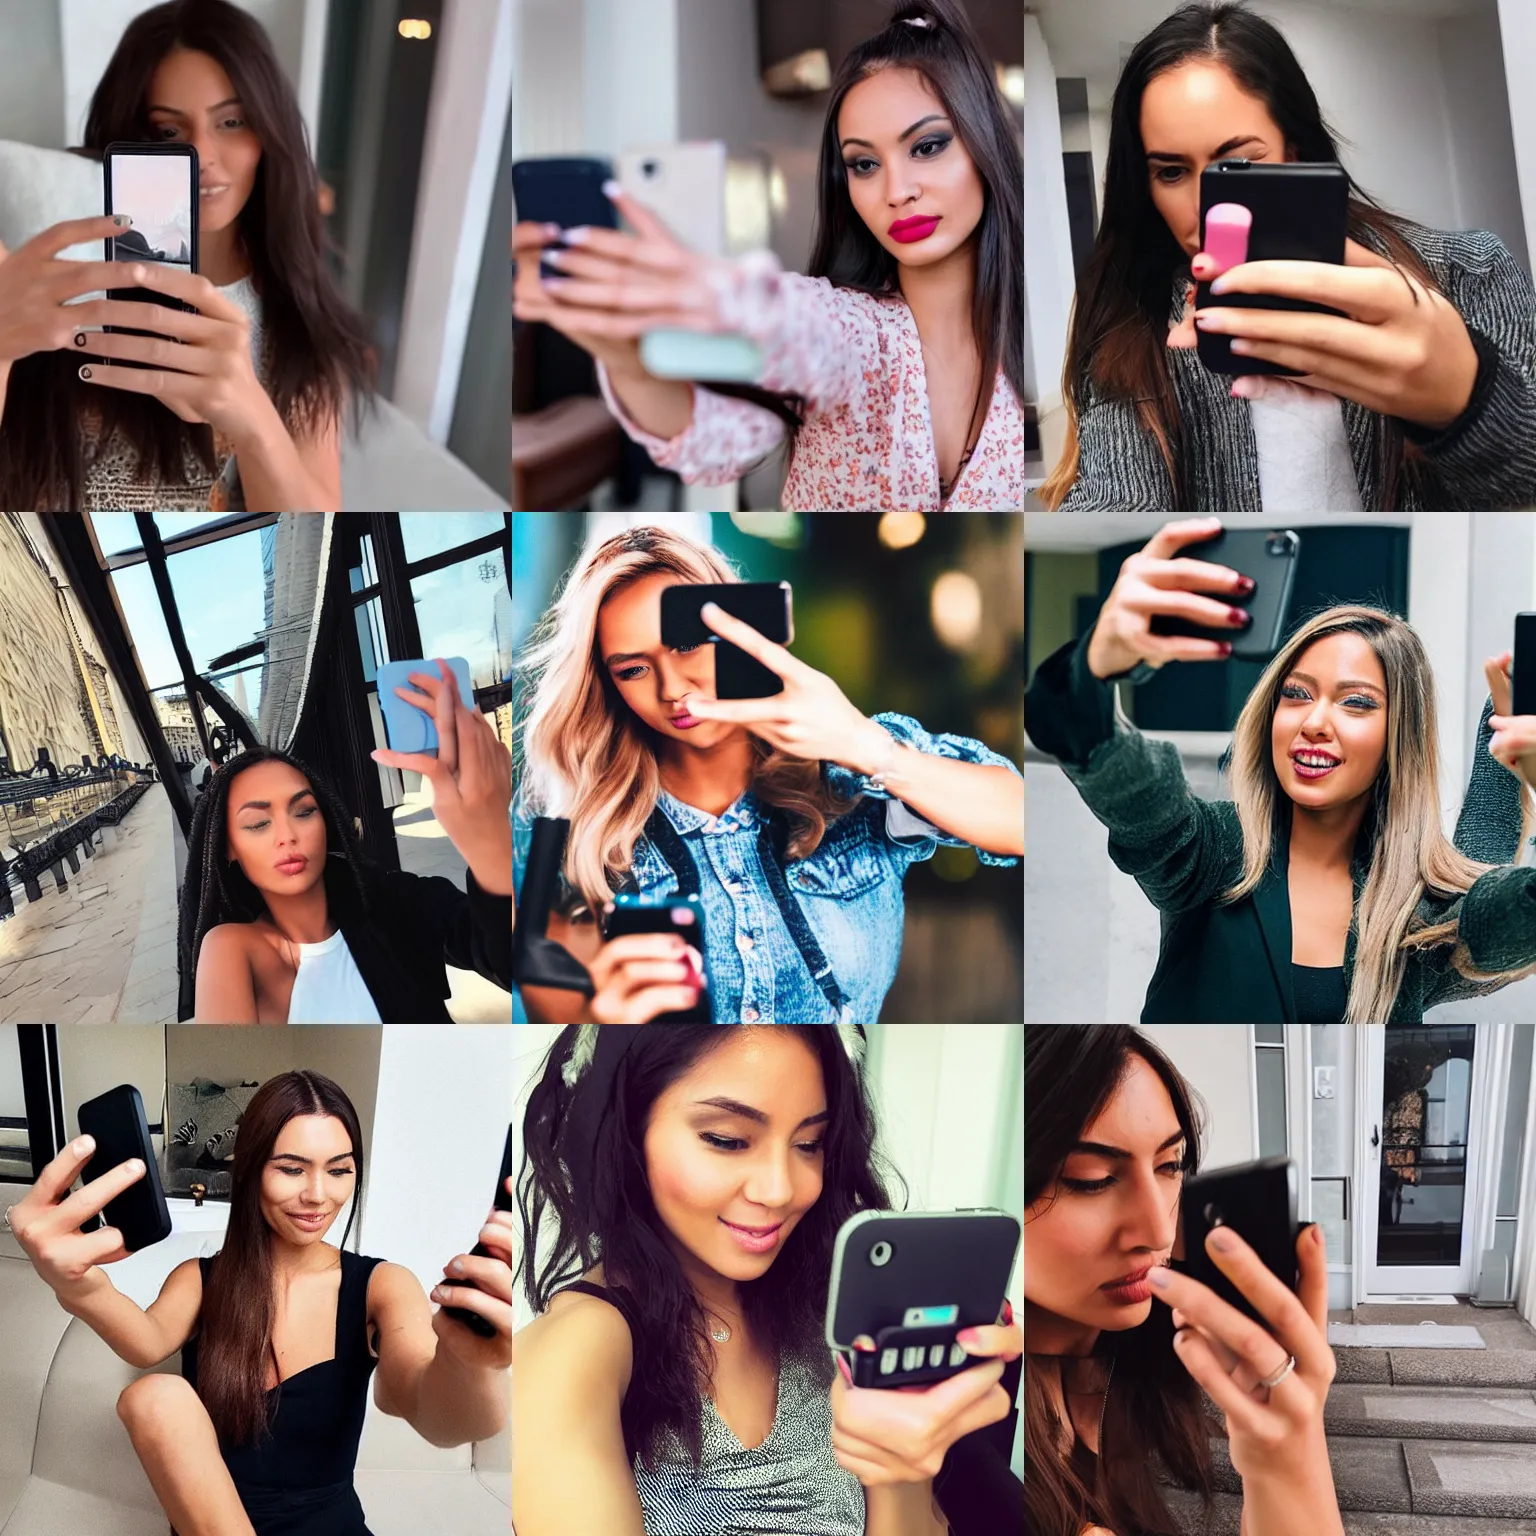 Selfie Poses for Instagram-Worthy Photos - Lemon8 Search